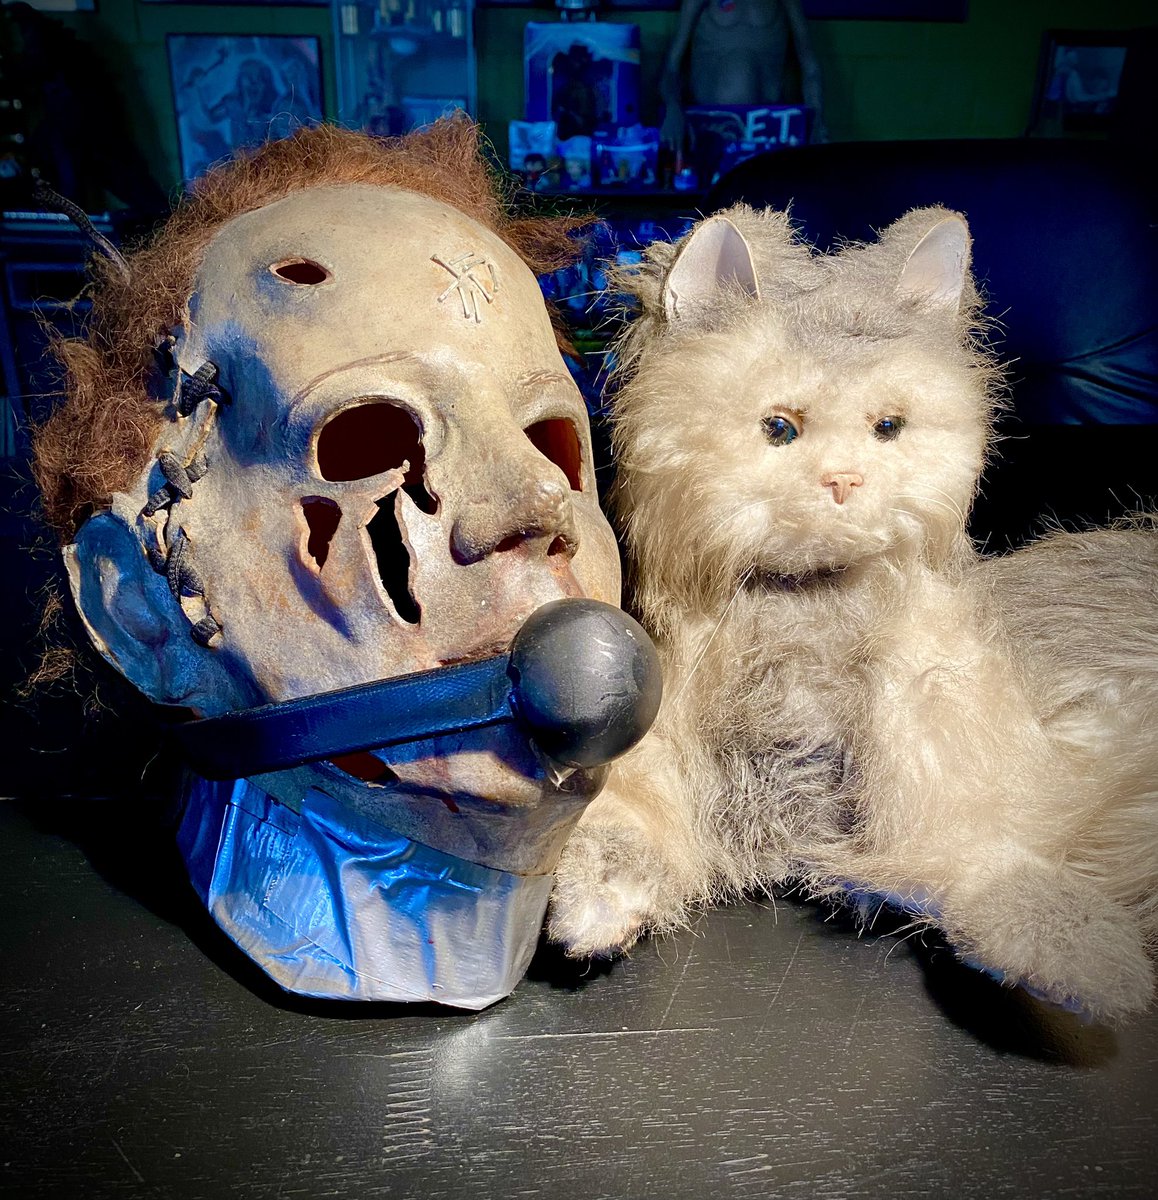 See you at @AstronomiconMI this weekend, Michigan! @thejoelynch and I are bringing W. Axl Rose the Cat and the screen worn S&M Myers mask for our #HOLLISTON photos… 🤘🏻